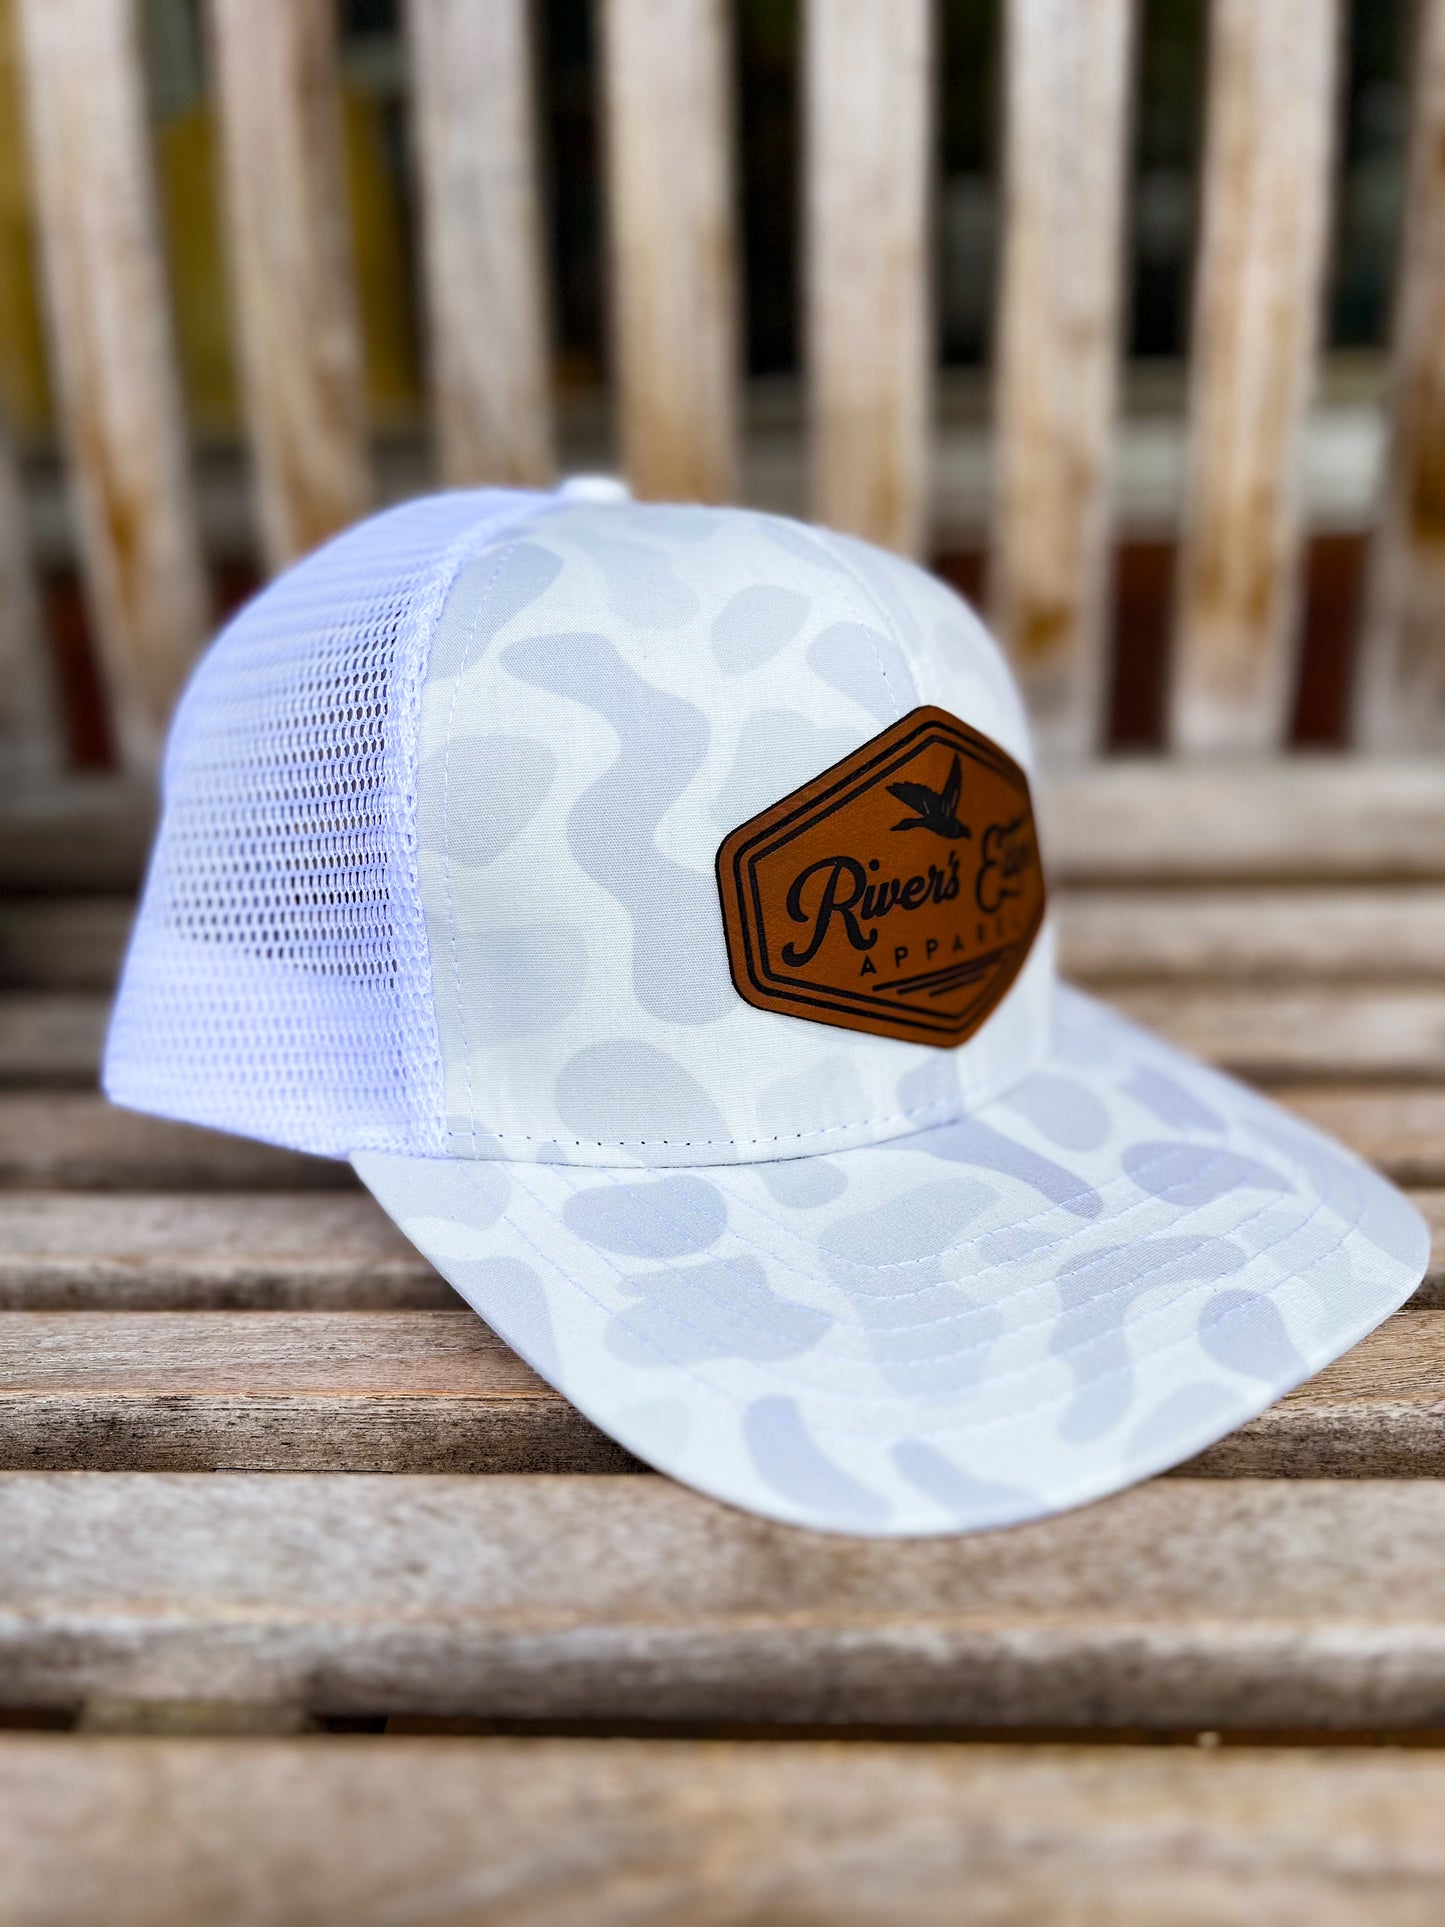 Rivers Edge Apparel Leather Patch Trucker Hat - White Old School Camo